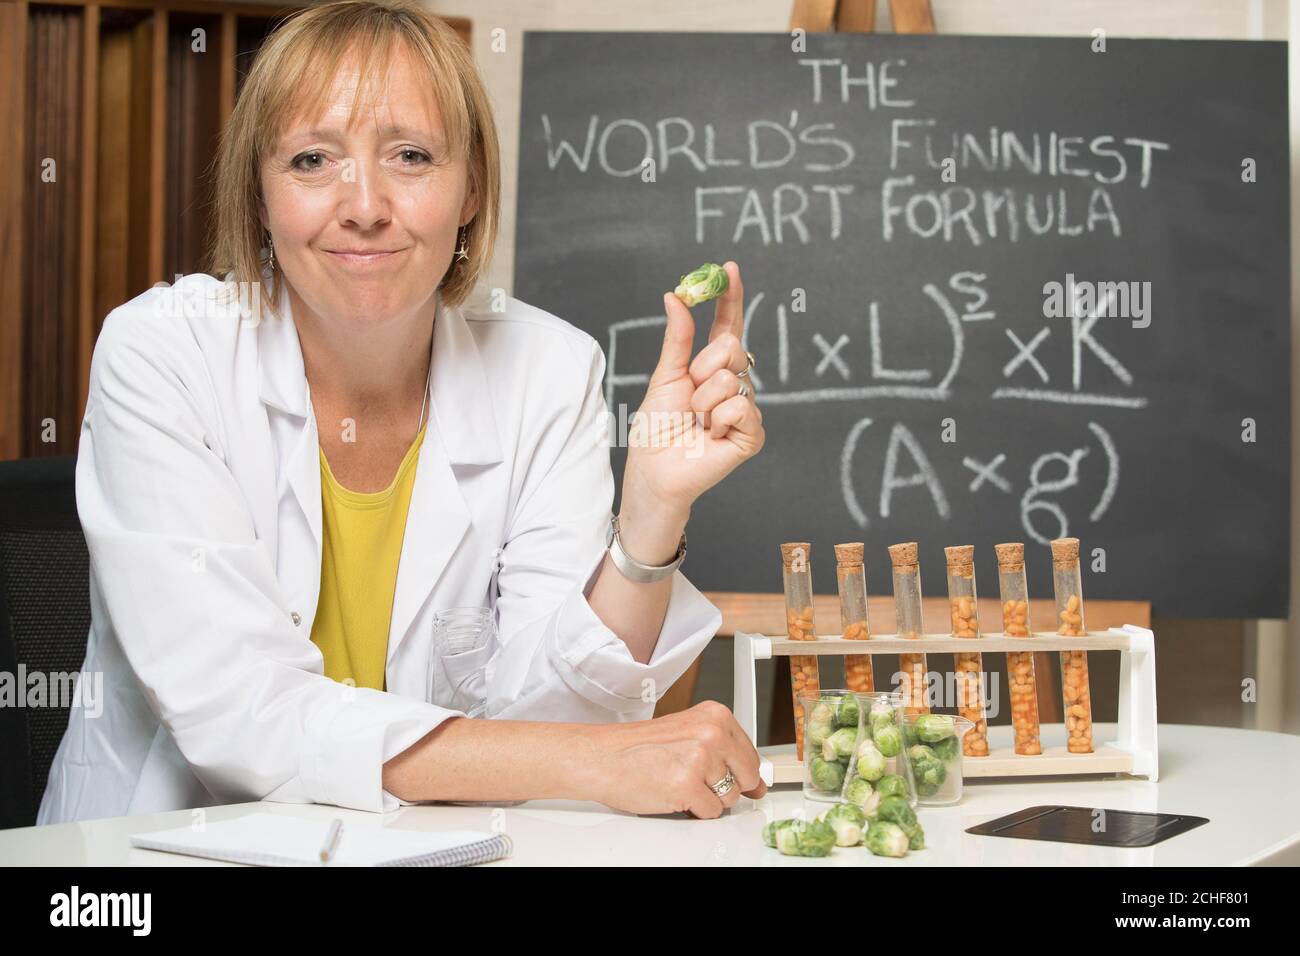 Scientist Dr Helen Pilcher reveals the mathematical formula for the world's funniest fart according to science, which has been discovered for a new study titled the Flatulence Report commissioned by Beano. Stock Photo